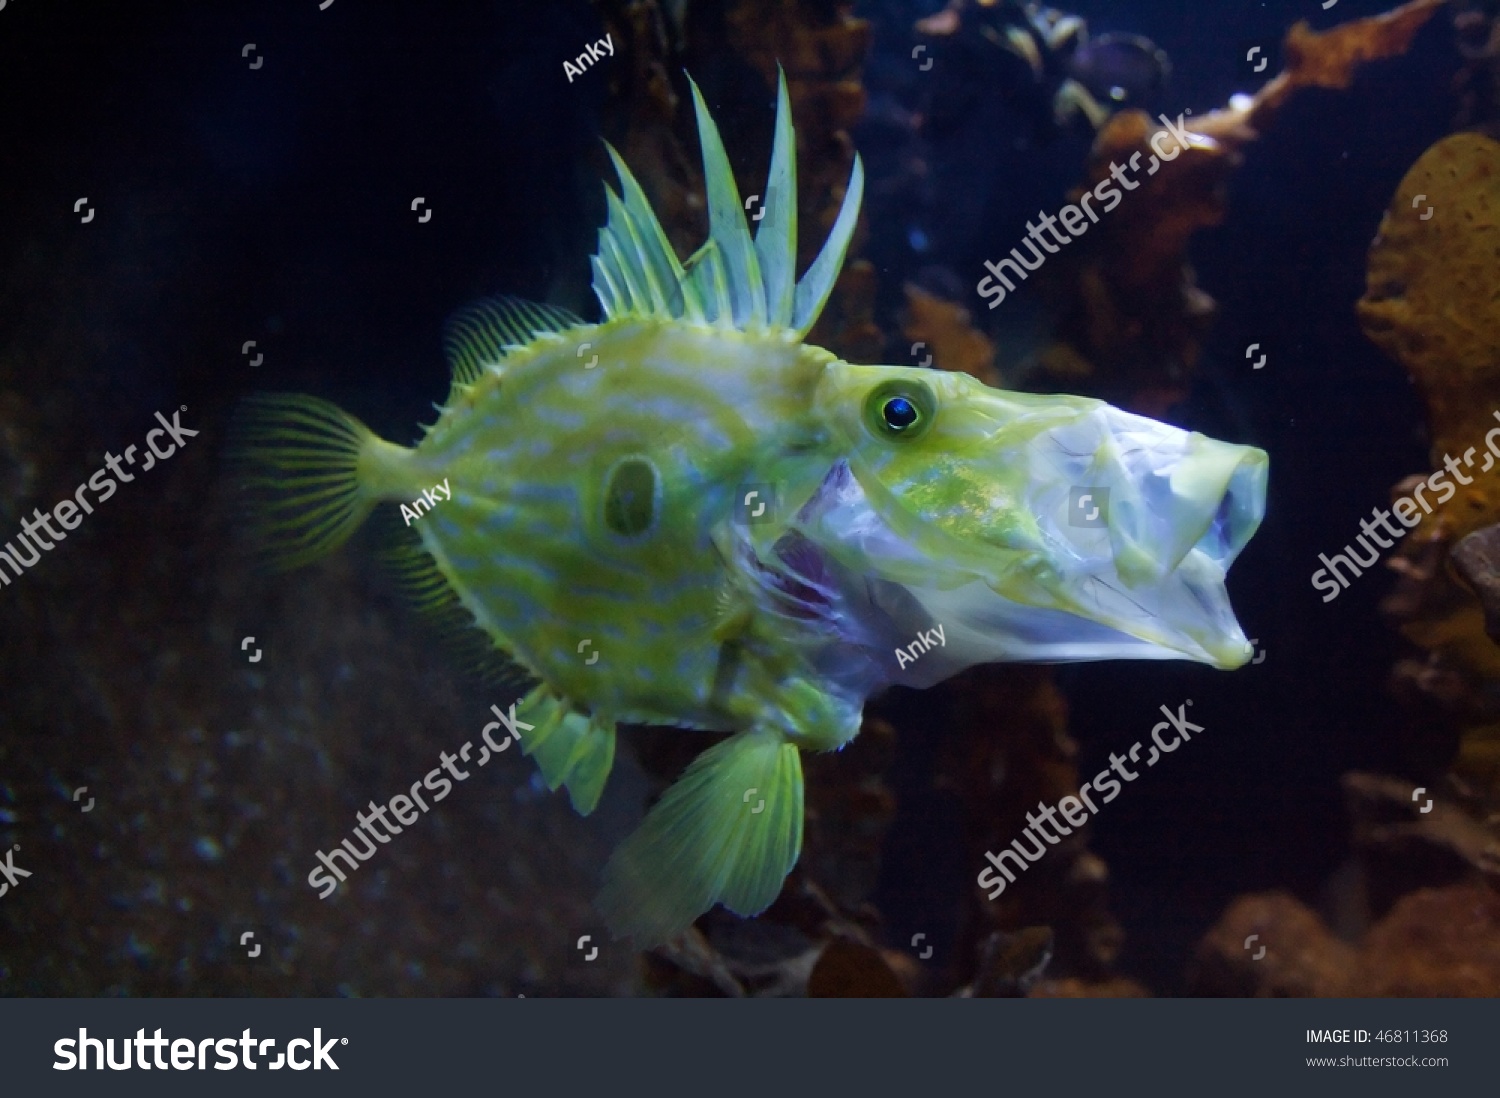 Congiopodidae, commonly known as pigfishes, horse-fishes and racehorses. #46811368